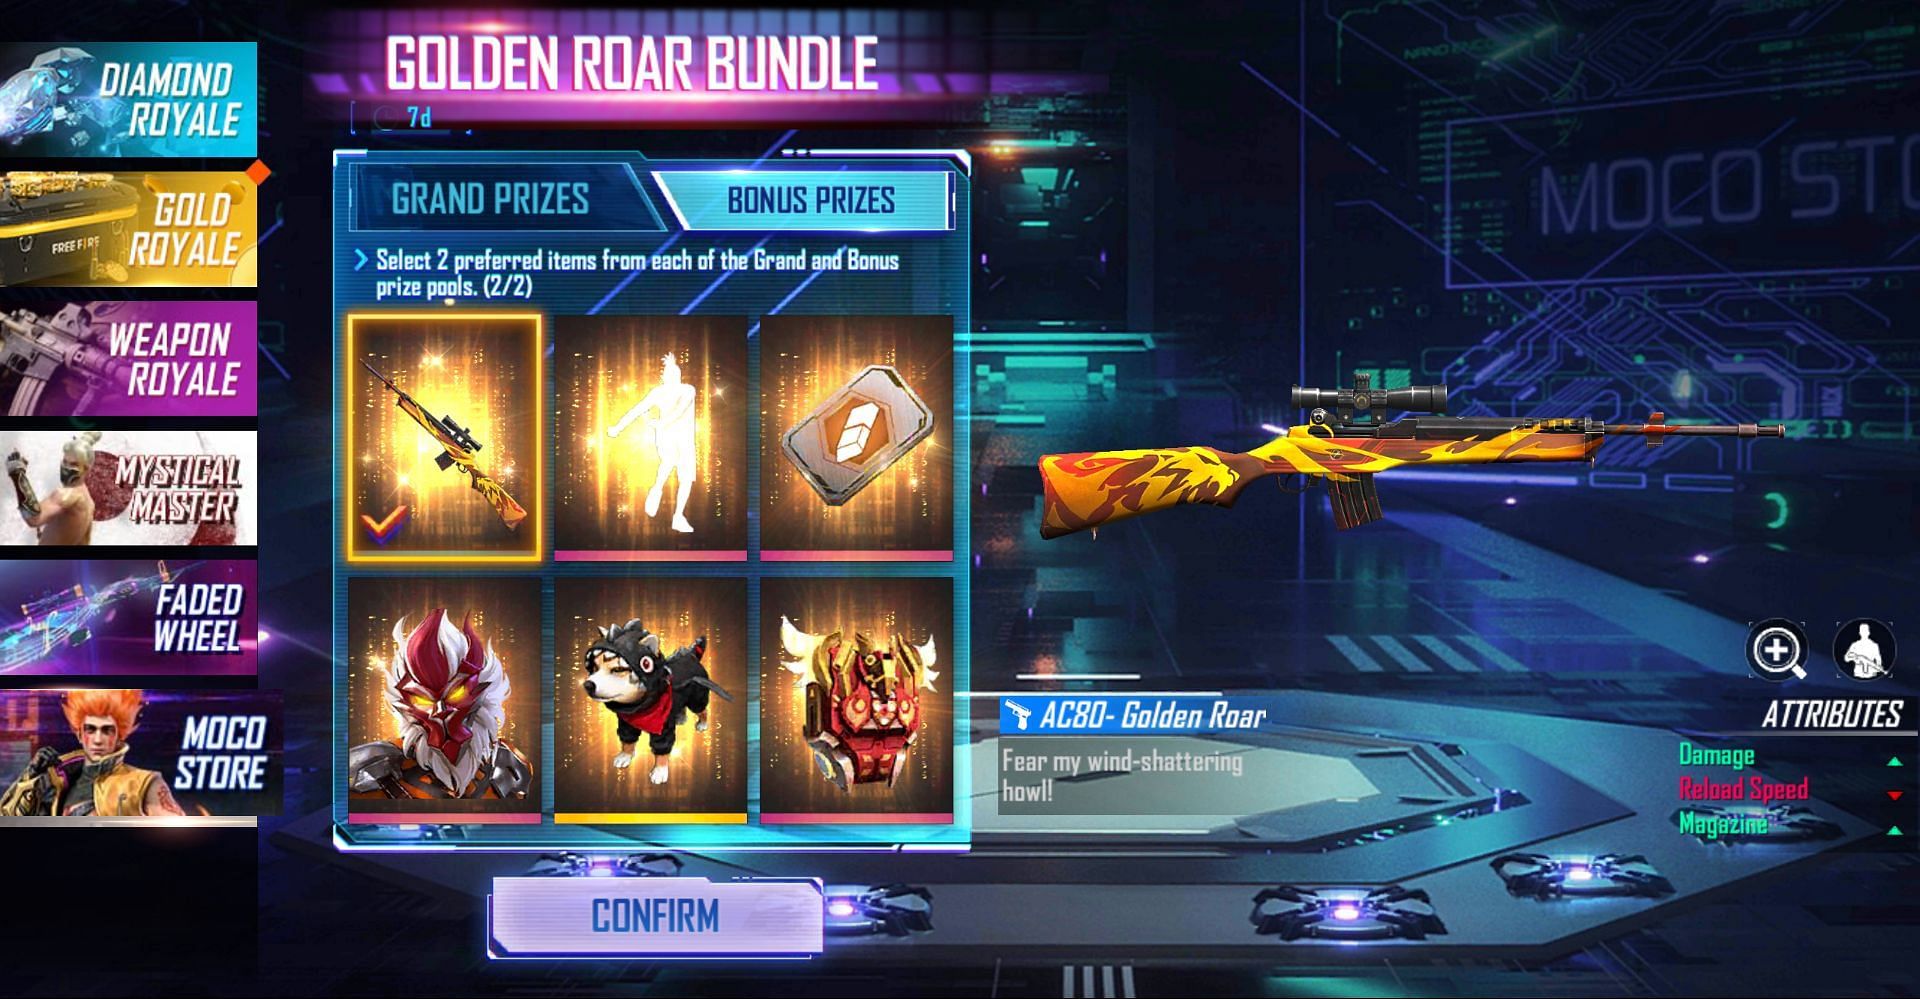 Bonus Prizes that gamers can select (Image via Free Fire)